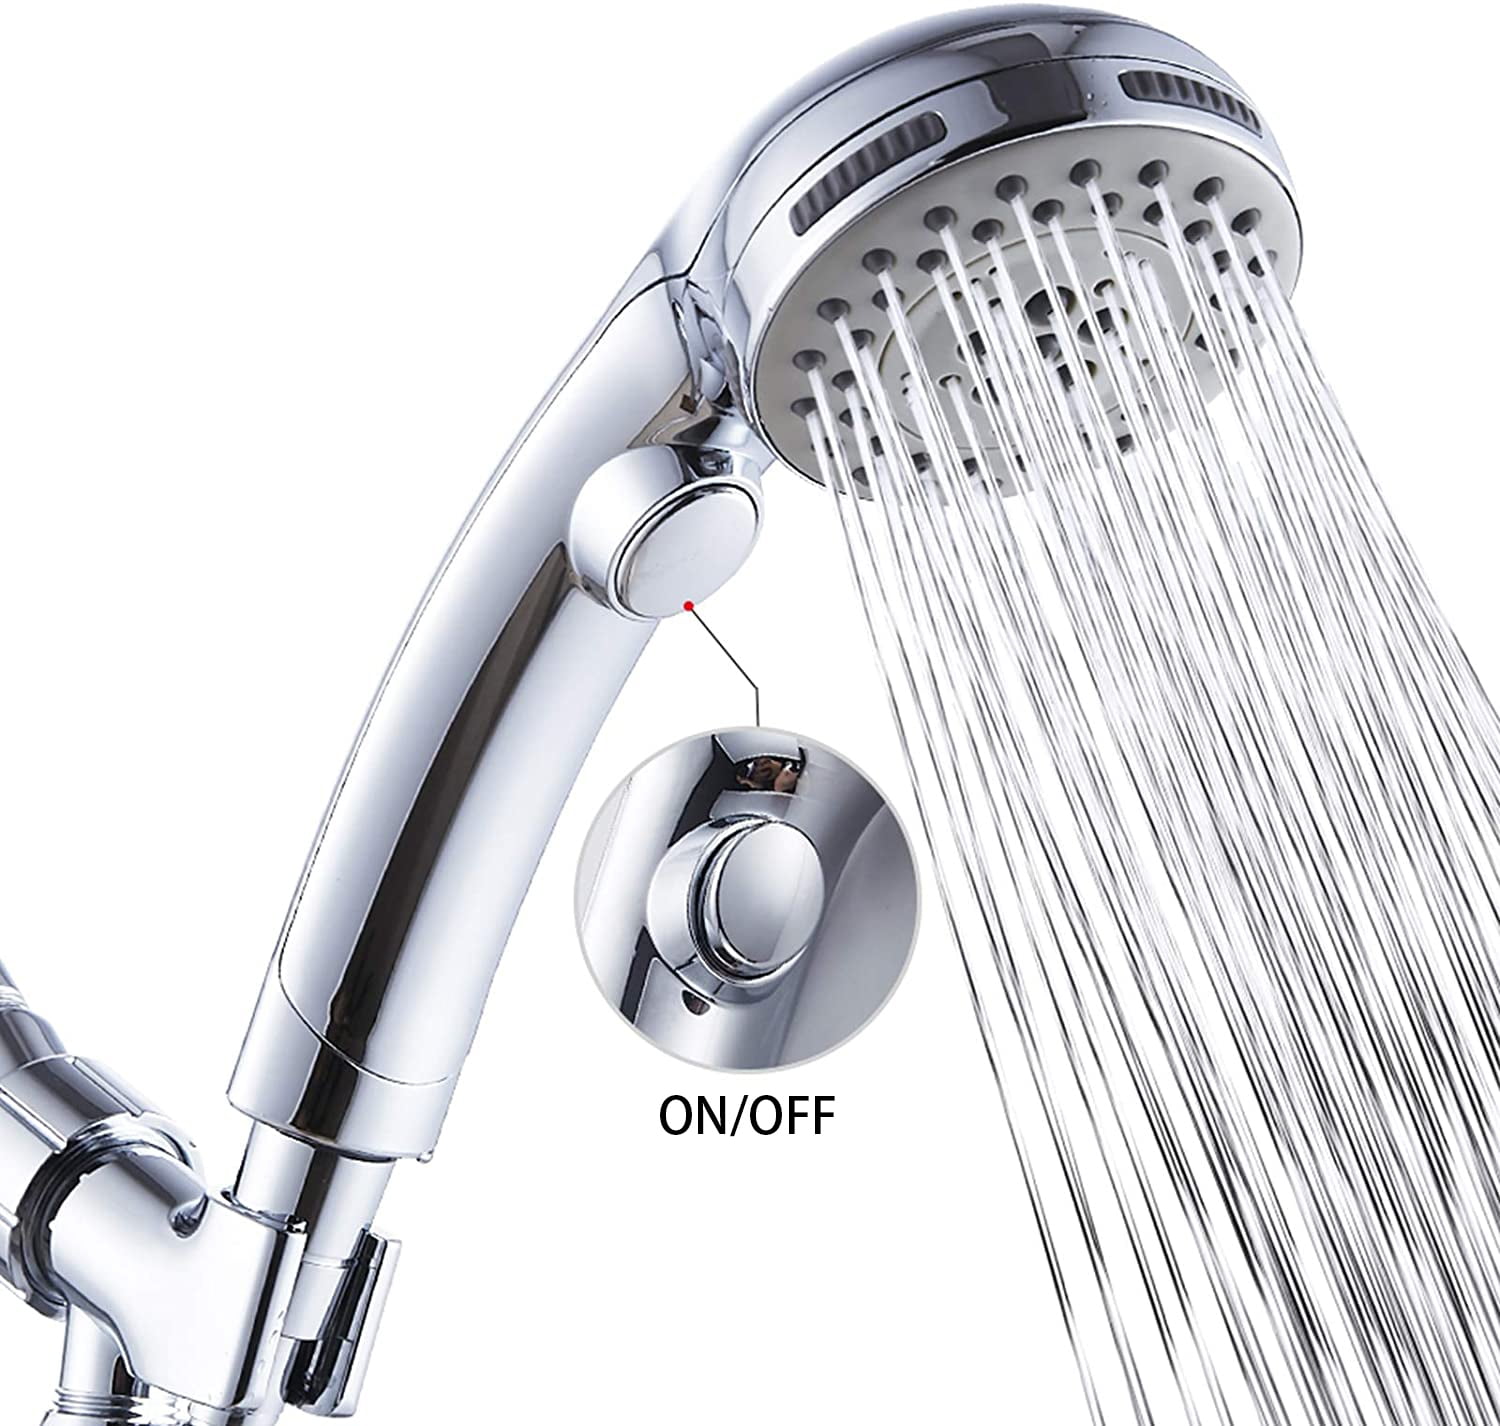 5 In 1 High Pressure Showerhead Handheld Shower Head Chrome  shower With Hose 